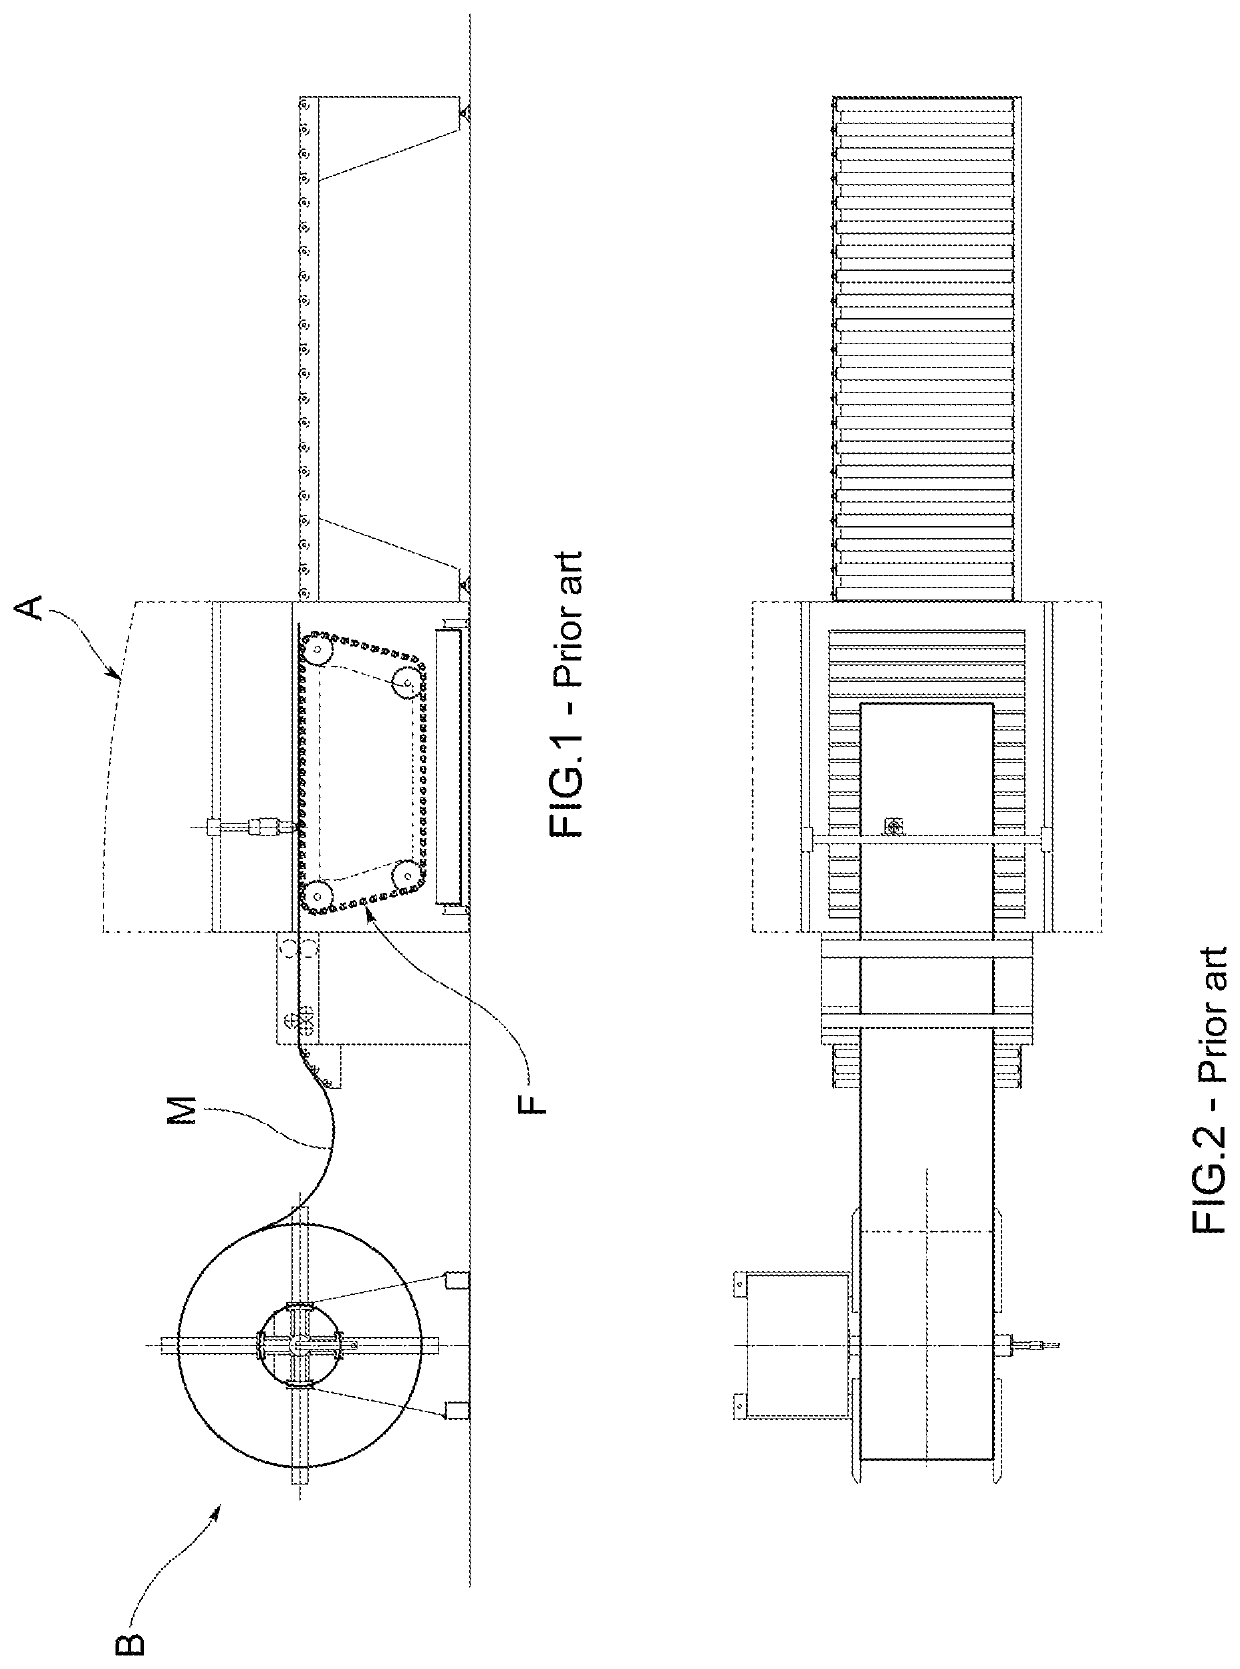 Apparatus and method for laser or plasma cutting of pieces of laminar material wound in coil